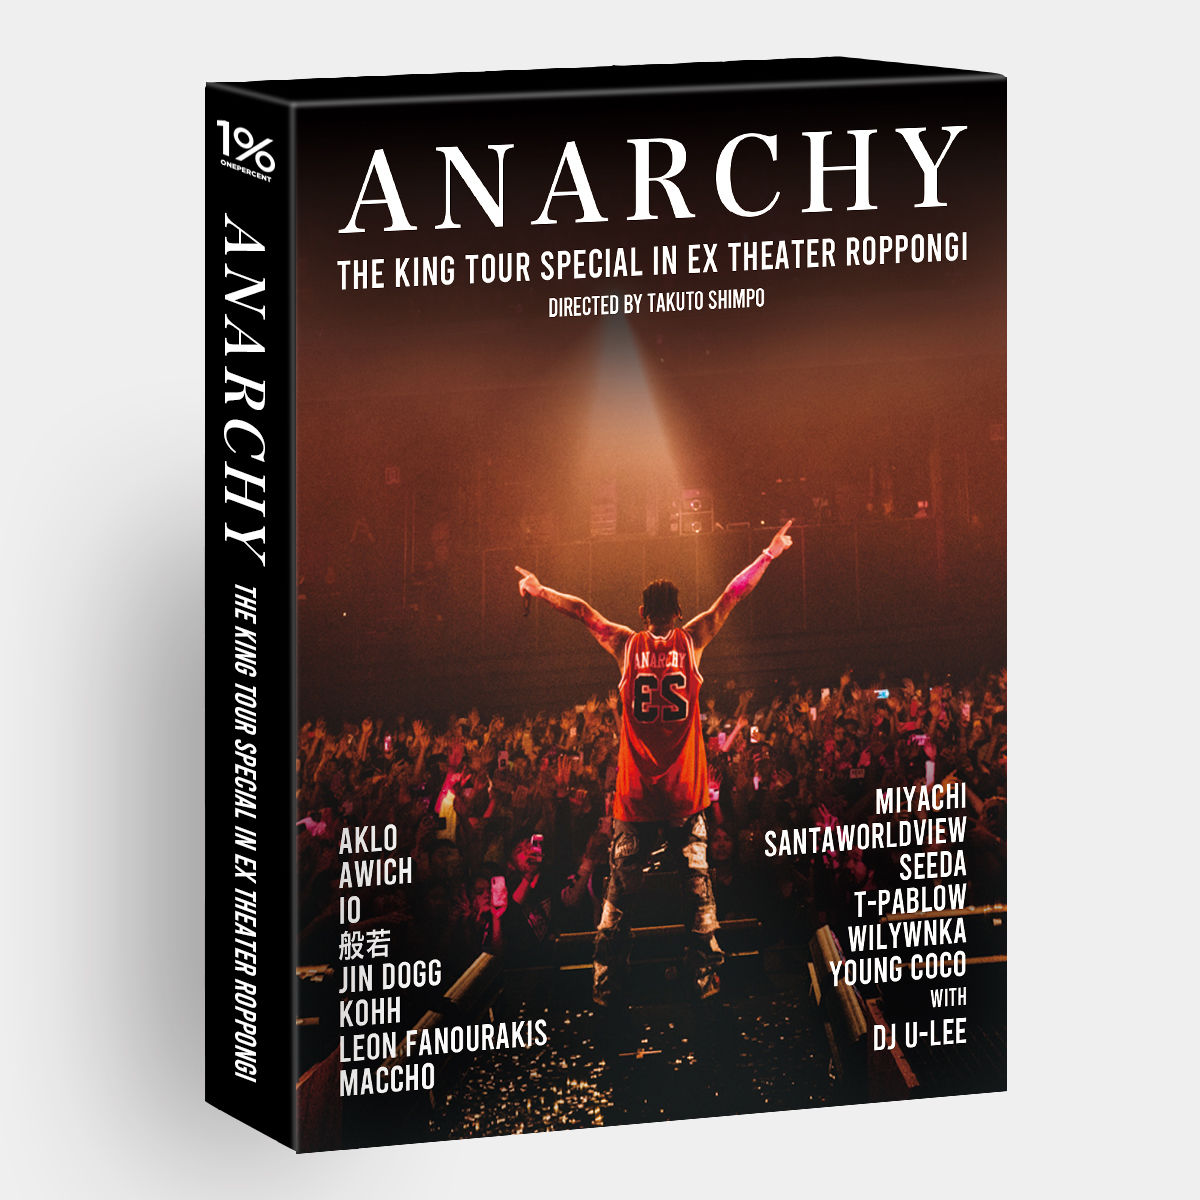 Blu-ray / 初回生産限定盤］ ANARCHY - THE KING TOUR SPE